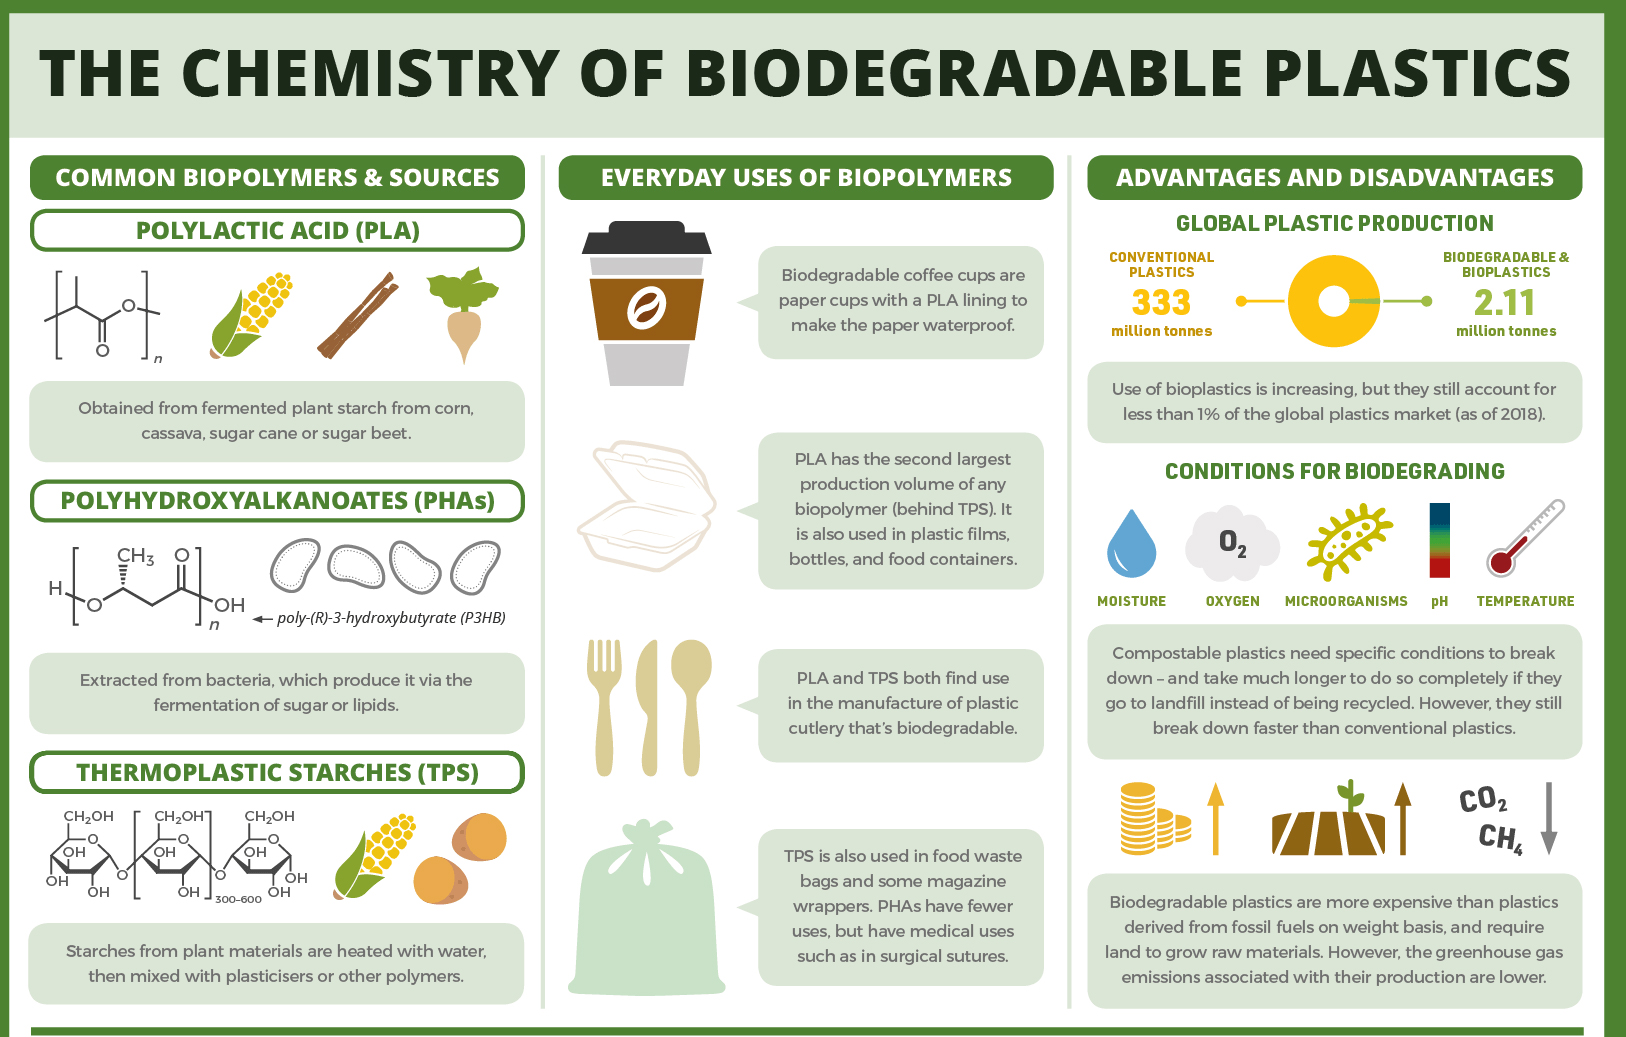 biodegradable plastics?   Biodegradable plastics are those that can decompose naturally in the environment. The makeup structure of biodegradable plastics makes them easily break down by natural microorganisms, giving a product that is less harmful to the environment.  How are Biodegradable Plastics Made?   Biodegradable plastics are made in a way that they can breakdown or degrade when exposed to the sun’s ultra-violet radiation, enzymes, bacteria, water, or wind abrasion. They are made from renewable raw materials or all-natural plant or animal materials such as orange peels, corn oil, switchgrass, soybeans, micro-organisms, or starch  The industrial processing of biodegradable plastics is like the manufacture of ordinary plastic, only that the materials used differ, and for bio-degradable plastics; they are the materials that can easily break down or decompose. They are mainly categorized into two:  Bioplastics; are purely made from natural substances such as corn starch. Examples of those made from corn starch. In their manufacturing process, they save energy and emit less carbon as the plants used already have the same amount of carbon.  Biodegradable plastics; made from traditional petrochemicals but designed to break down faster. They have additives that speed up their rate of decay or breakdown in the presence of oxygen and light.  The presence of moisture also accelerates the breakdown process. Mainly, they get a breakdown in the presence of the sun’s UV light with some only breaking down at high industrial-scale temperatures.  The most common examples include polybutyrate adipate terephthalate (PBAT), polybutylene succinate (PBS), polyvinyl alcohol (PVOH/PVA), and polycaprolactone (PCL).  Advantages of Using Biodegradable Plastics   Biodegradable Plastics are easy to Recycle  They Consume less energy during their manufacture  Biodegradable plastics are a better choice as they are broken down easily and can be absorbed by the soil or converted into compost.  Composting bioplastic products can make the soil fertile, thereby enhancing soil fertility.    Since fossil fuels are not required in the manufacturing process of such nature-friendly, biodegradable plastic products, carbon dioxide emissions are also curtailed.  The use of biodegradable plastic products instead of traditional plastics lessens the amount of greenhouse gas emissions  Disadvantages of Biodegradable Plastics   Need for Costly Equipment for Both Processing and Recycling  Risk of Contamination due to confusion differentiating between Bio-degradable and Non-Biodegradable Plastics  Biodegradable Plastics may produce Methane in landfills  There is a need for more crops and croplands to produce Biodegradable Plastics. 